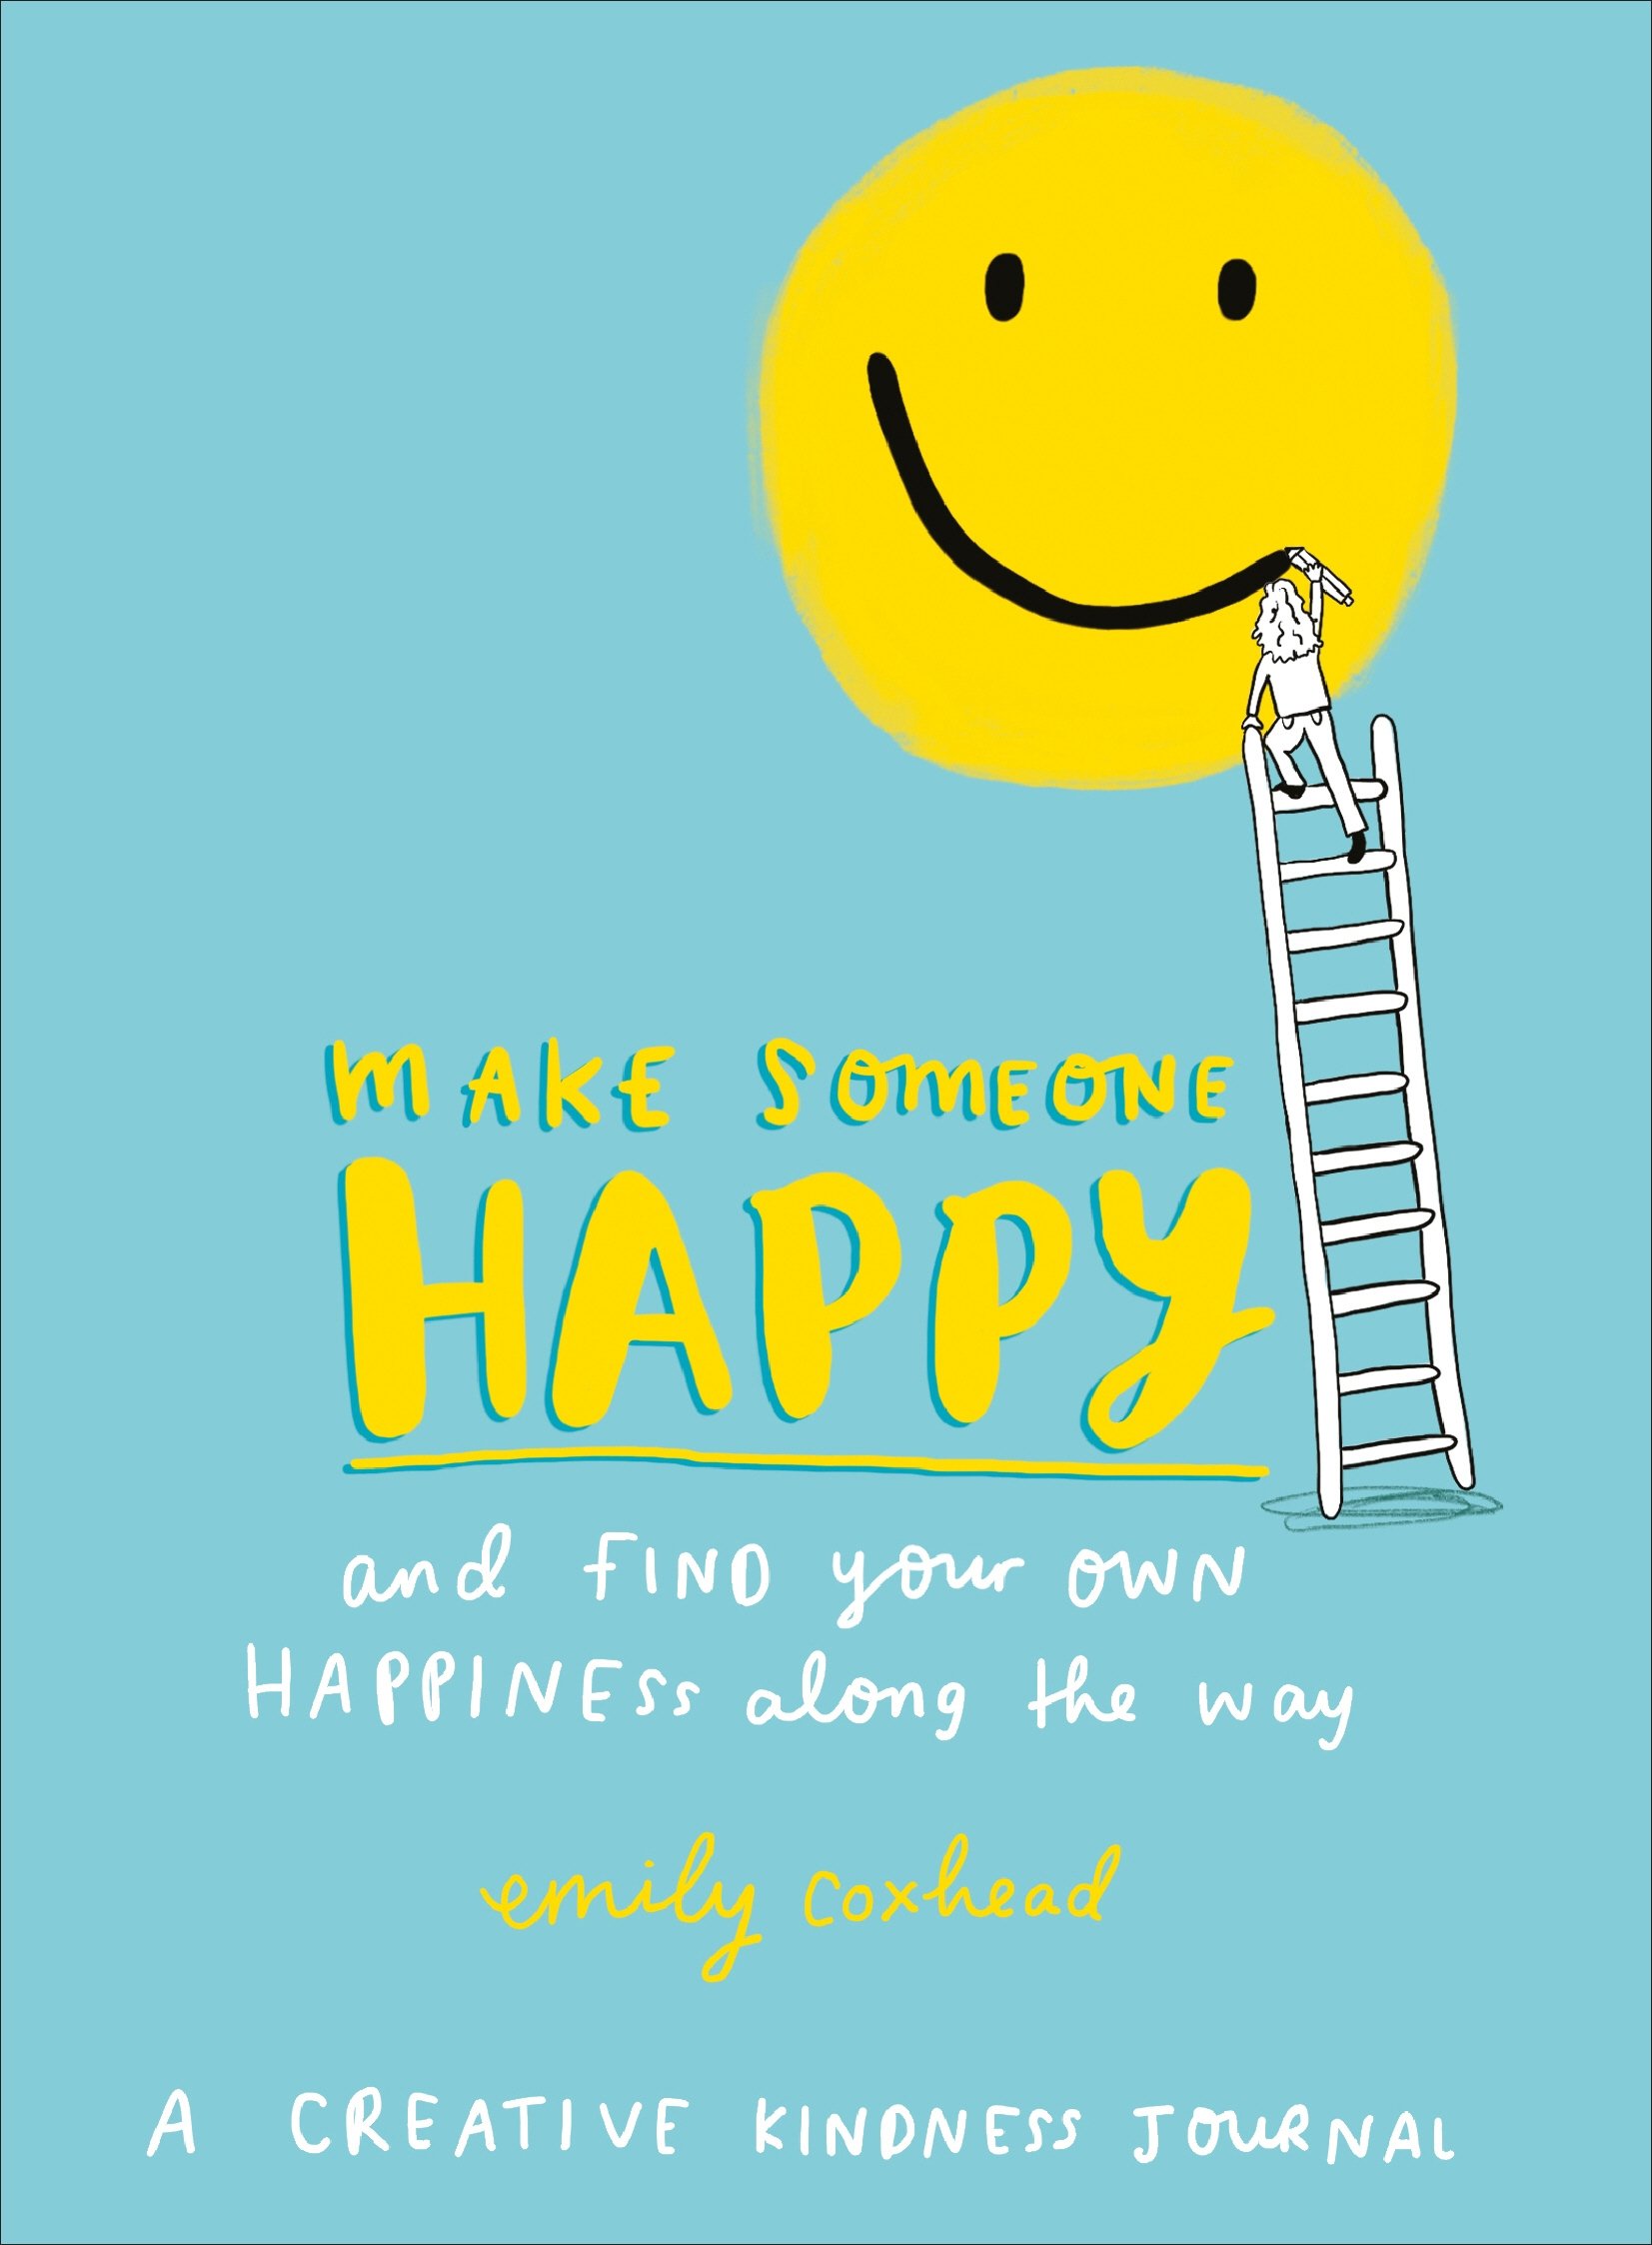 Make Someone Happy and Find Your Own Happiness Along the Way | Emily Coxhead image0